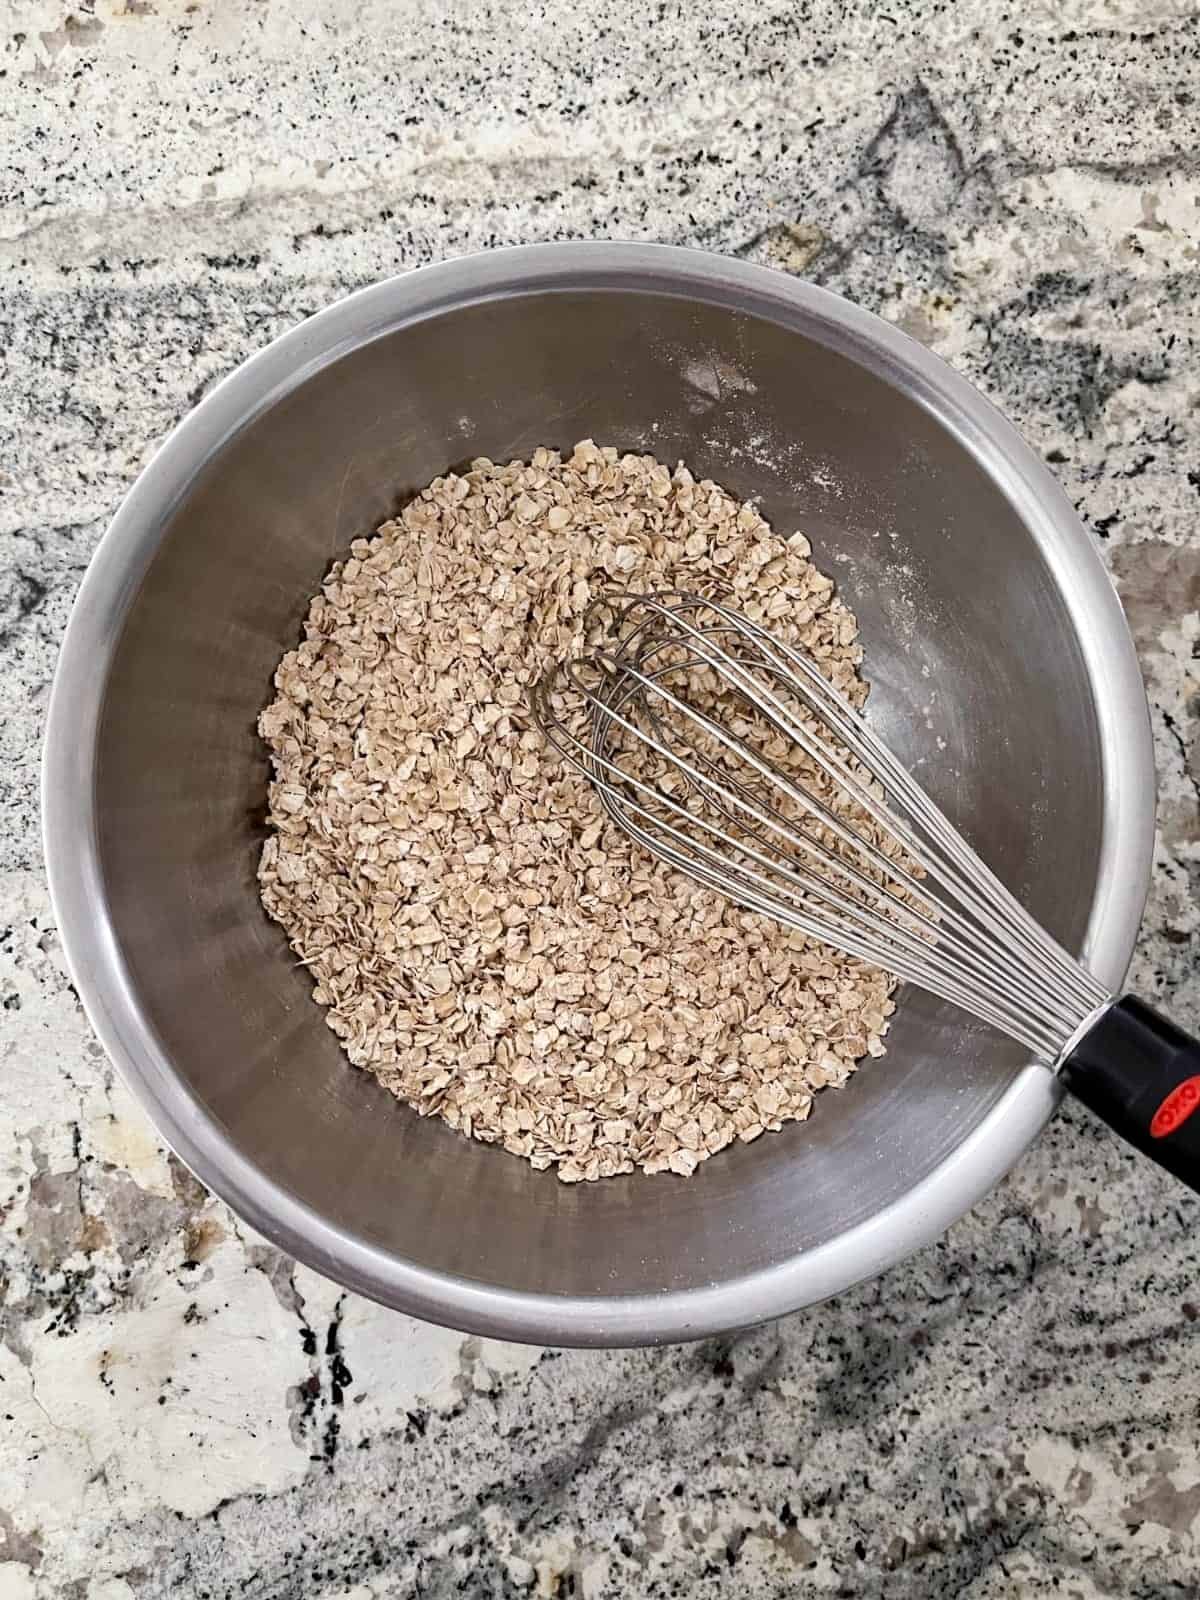 Whisking quick oats, flour, cinnamon, baking powder and baking soda in mixing bowl.